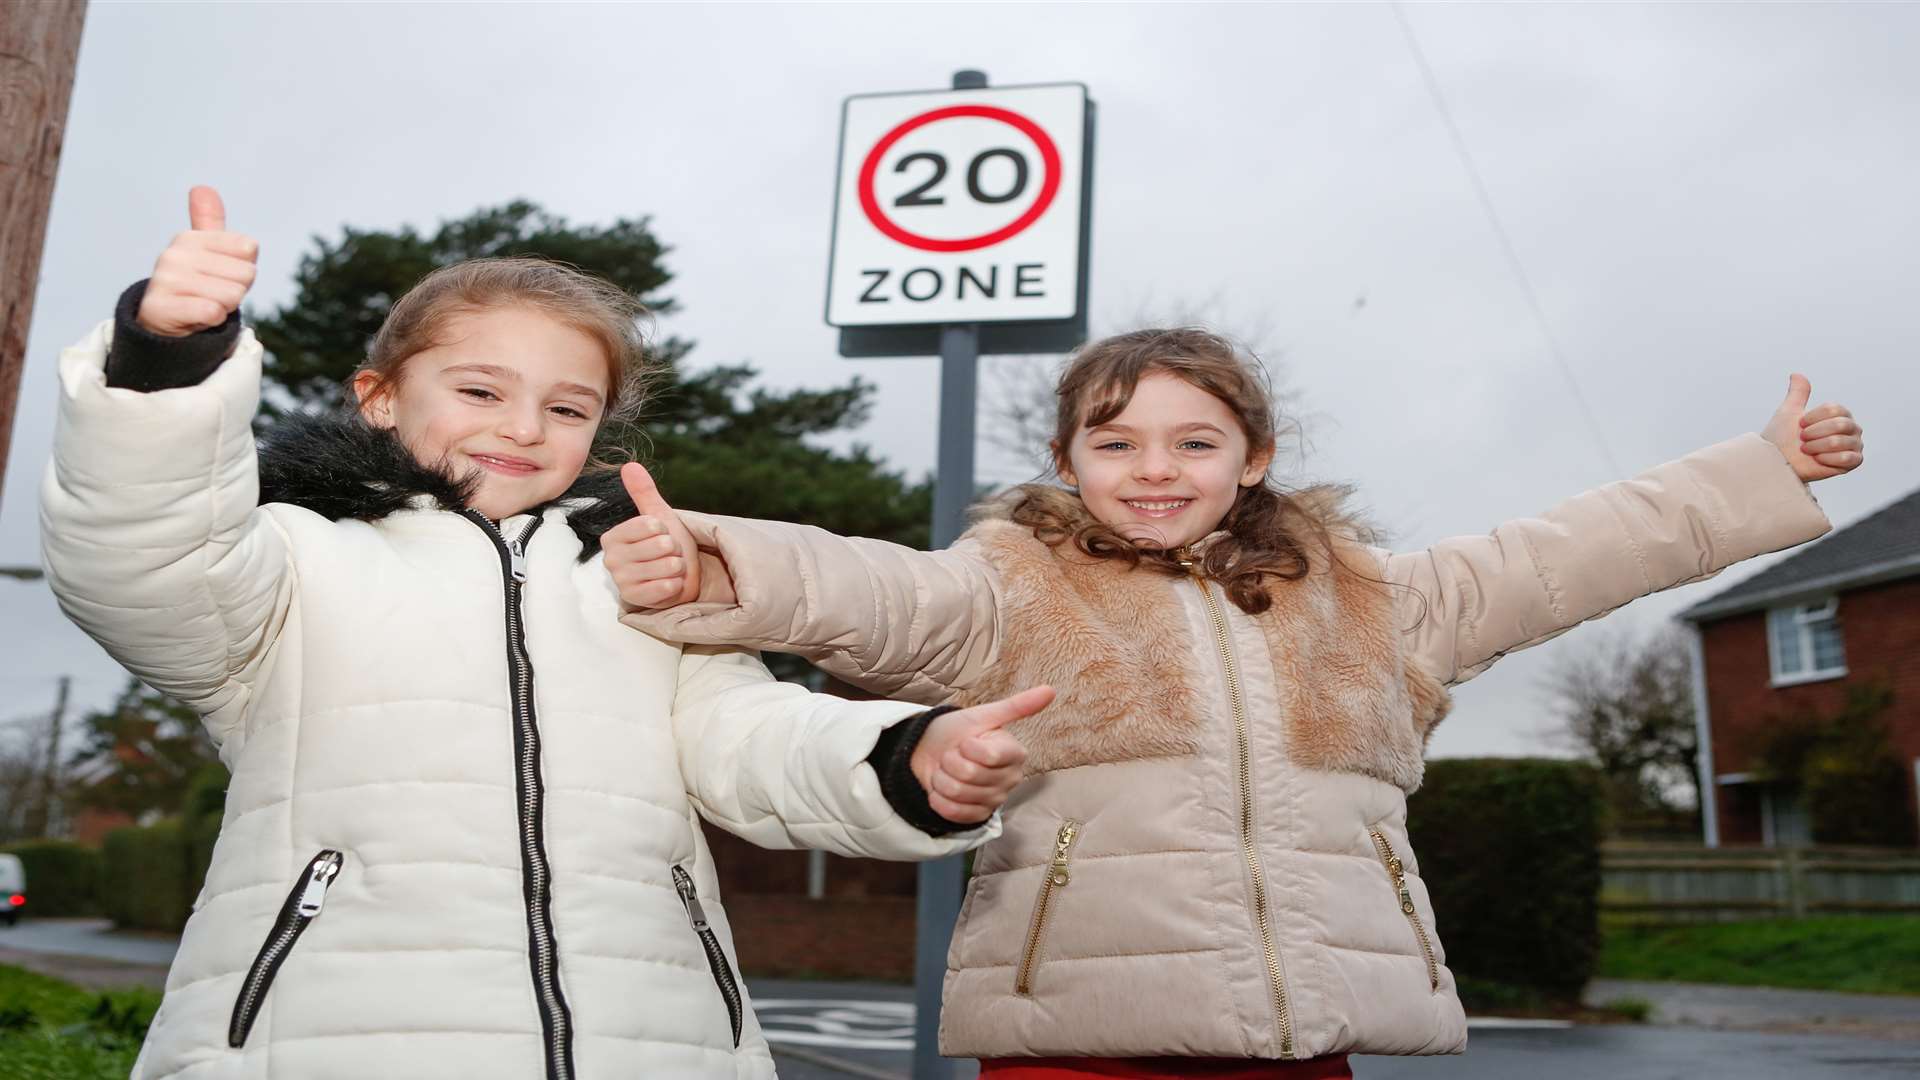 Twins Tiani and Lilly Alabaster-Oliver by the signs for the new 20mph zone